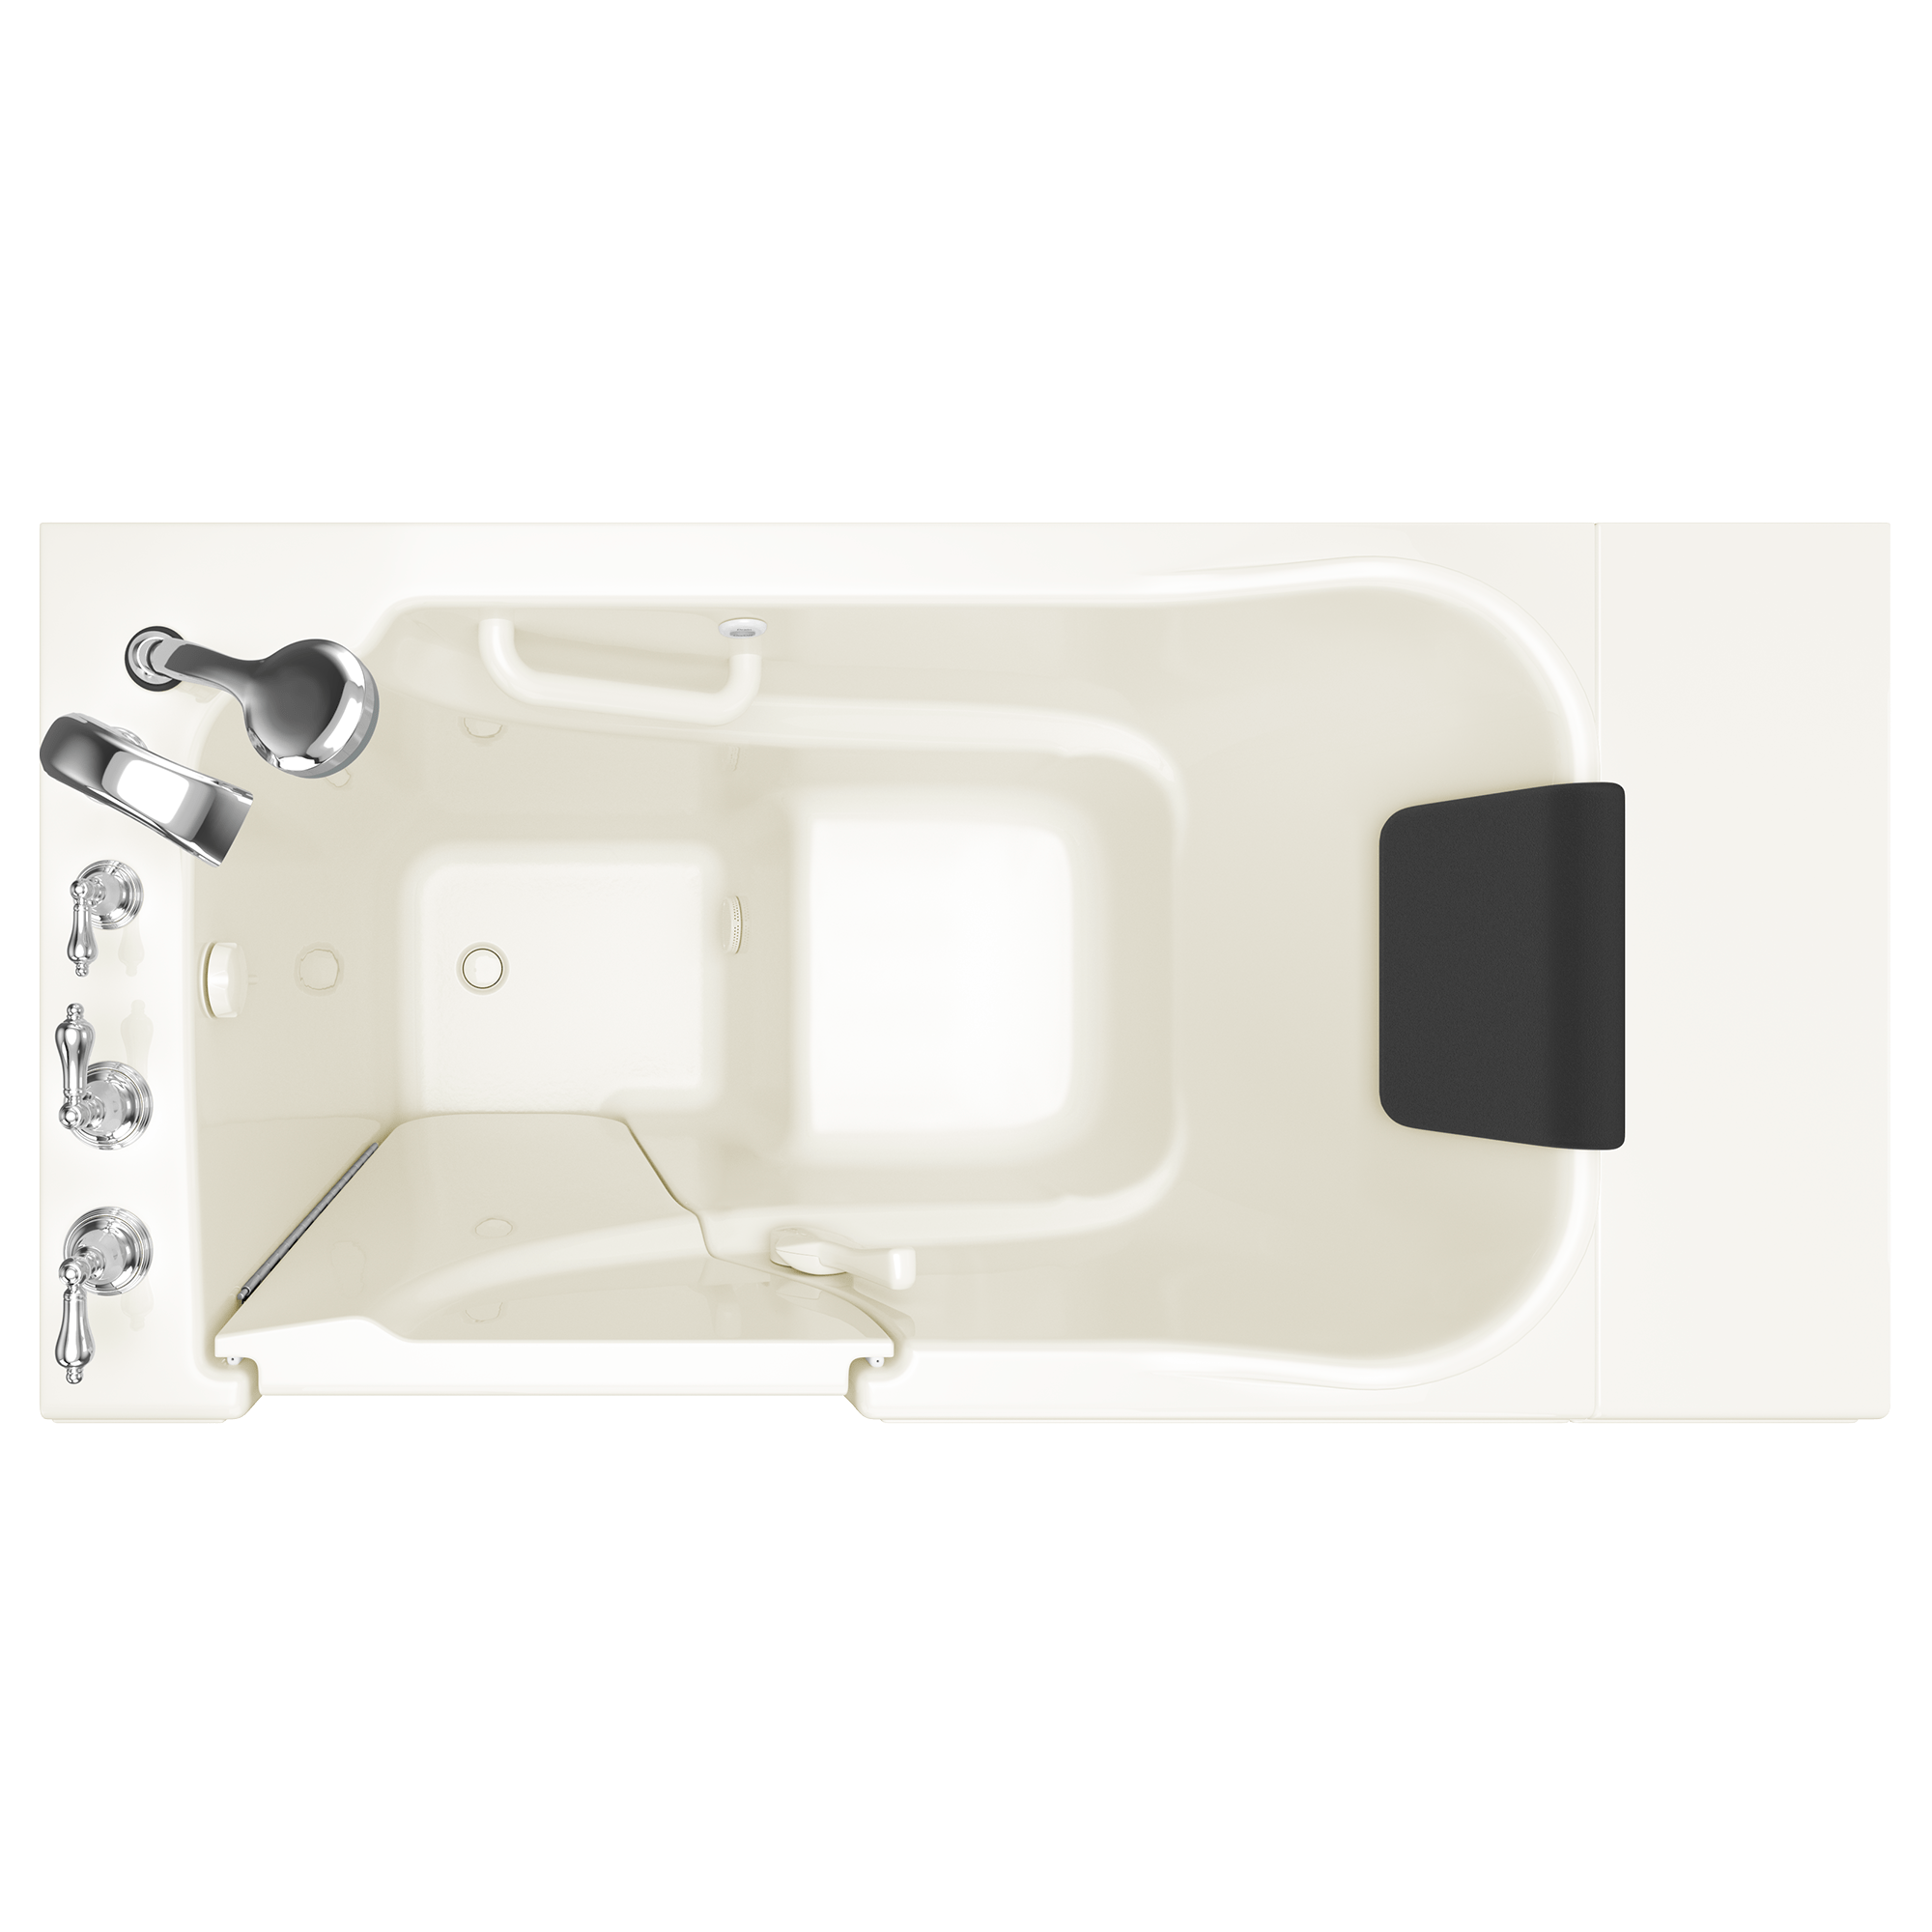 Gelcoat Premium Series 30 x 52 -Inch Walk-in Tub With Soaker System - Left-Hand Drain With Faucet